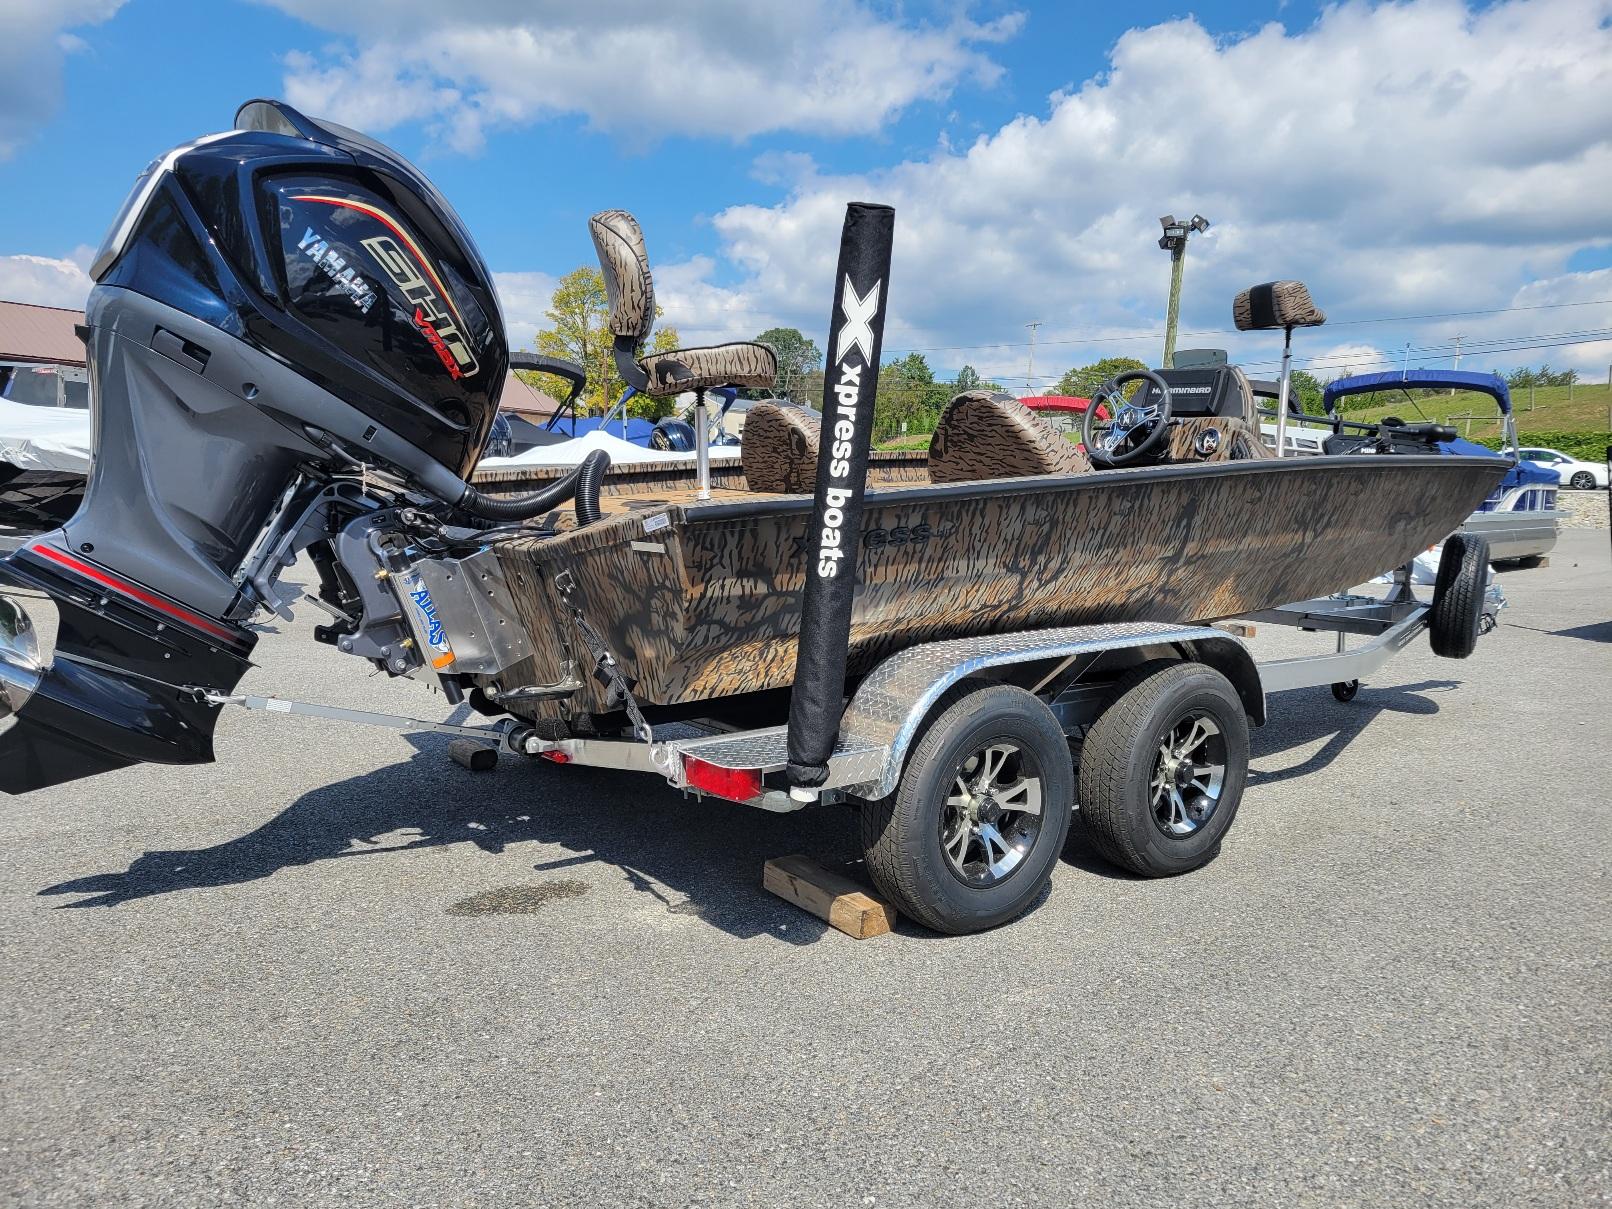 Xpress boats for sale in Pennsylvania - Boat Trader